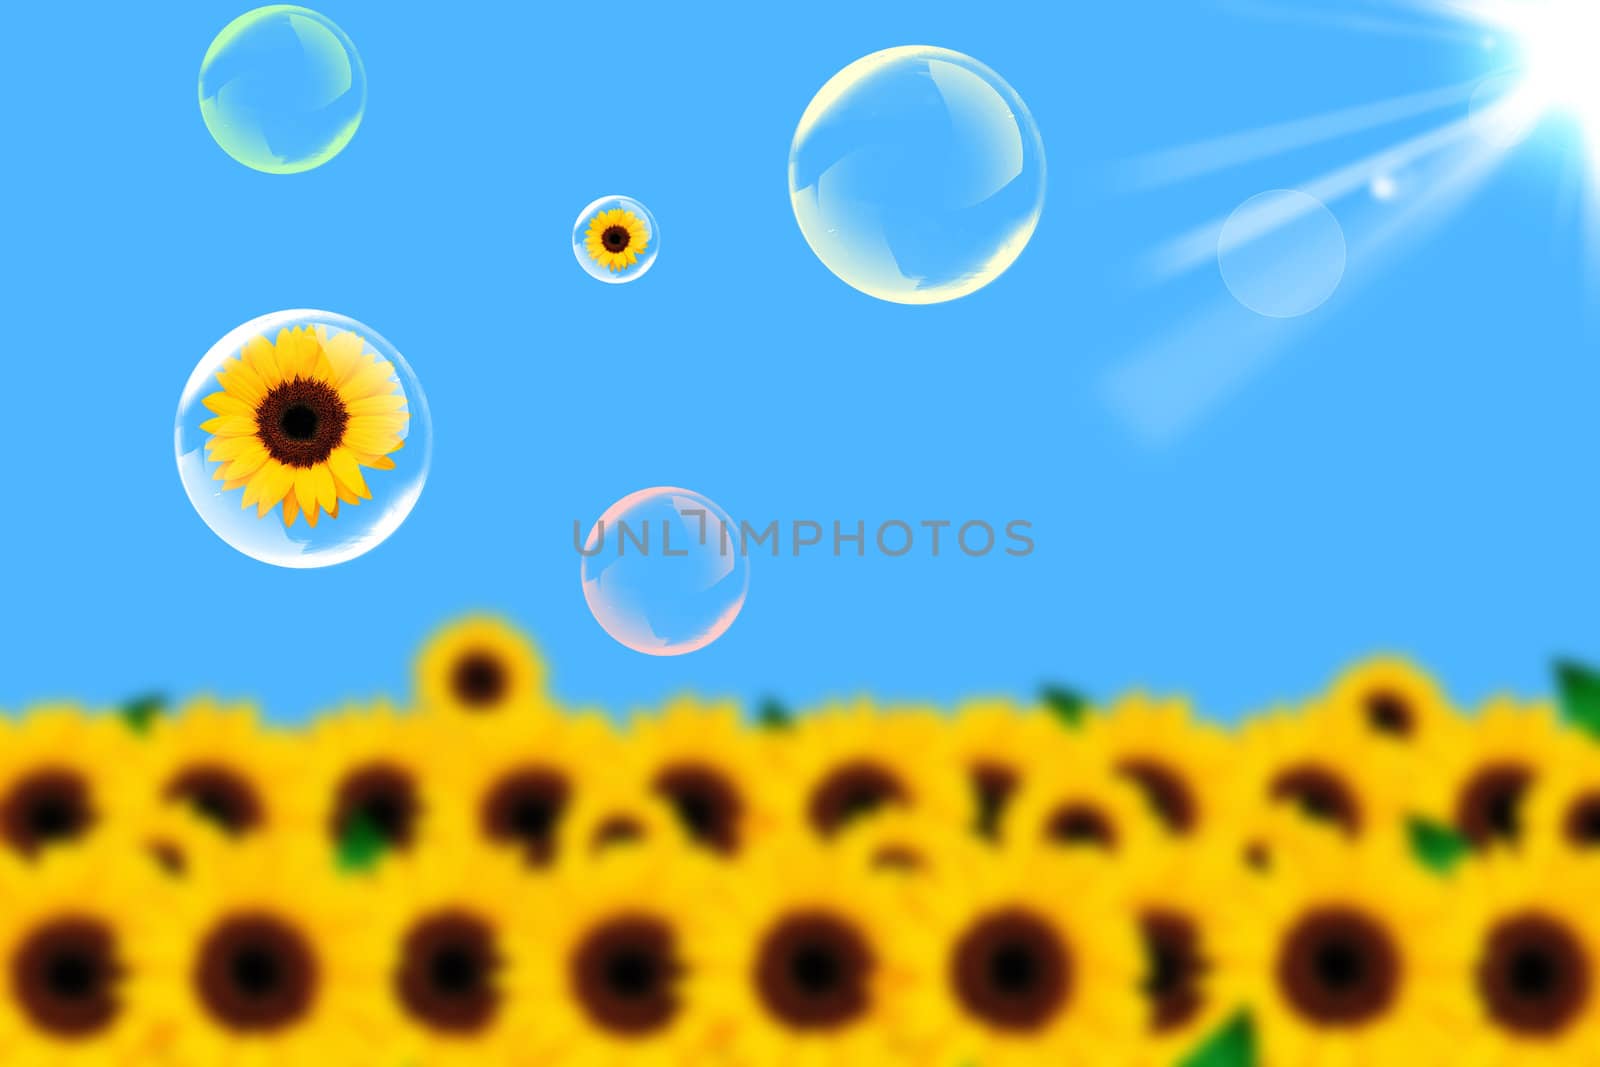 Soap bubble and sunflower by petrkurgan